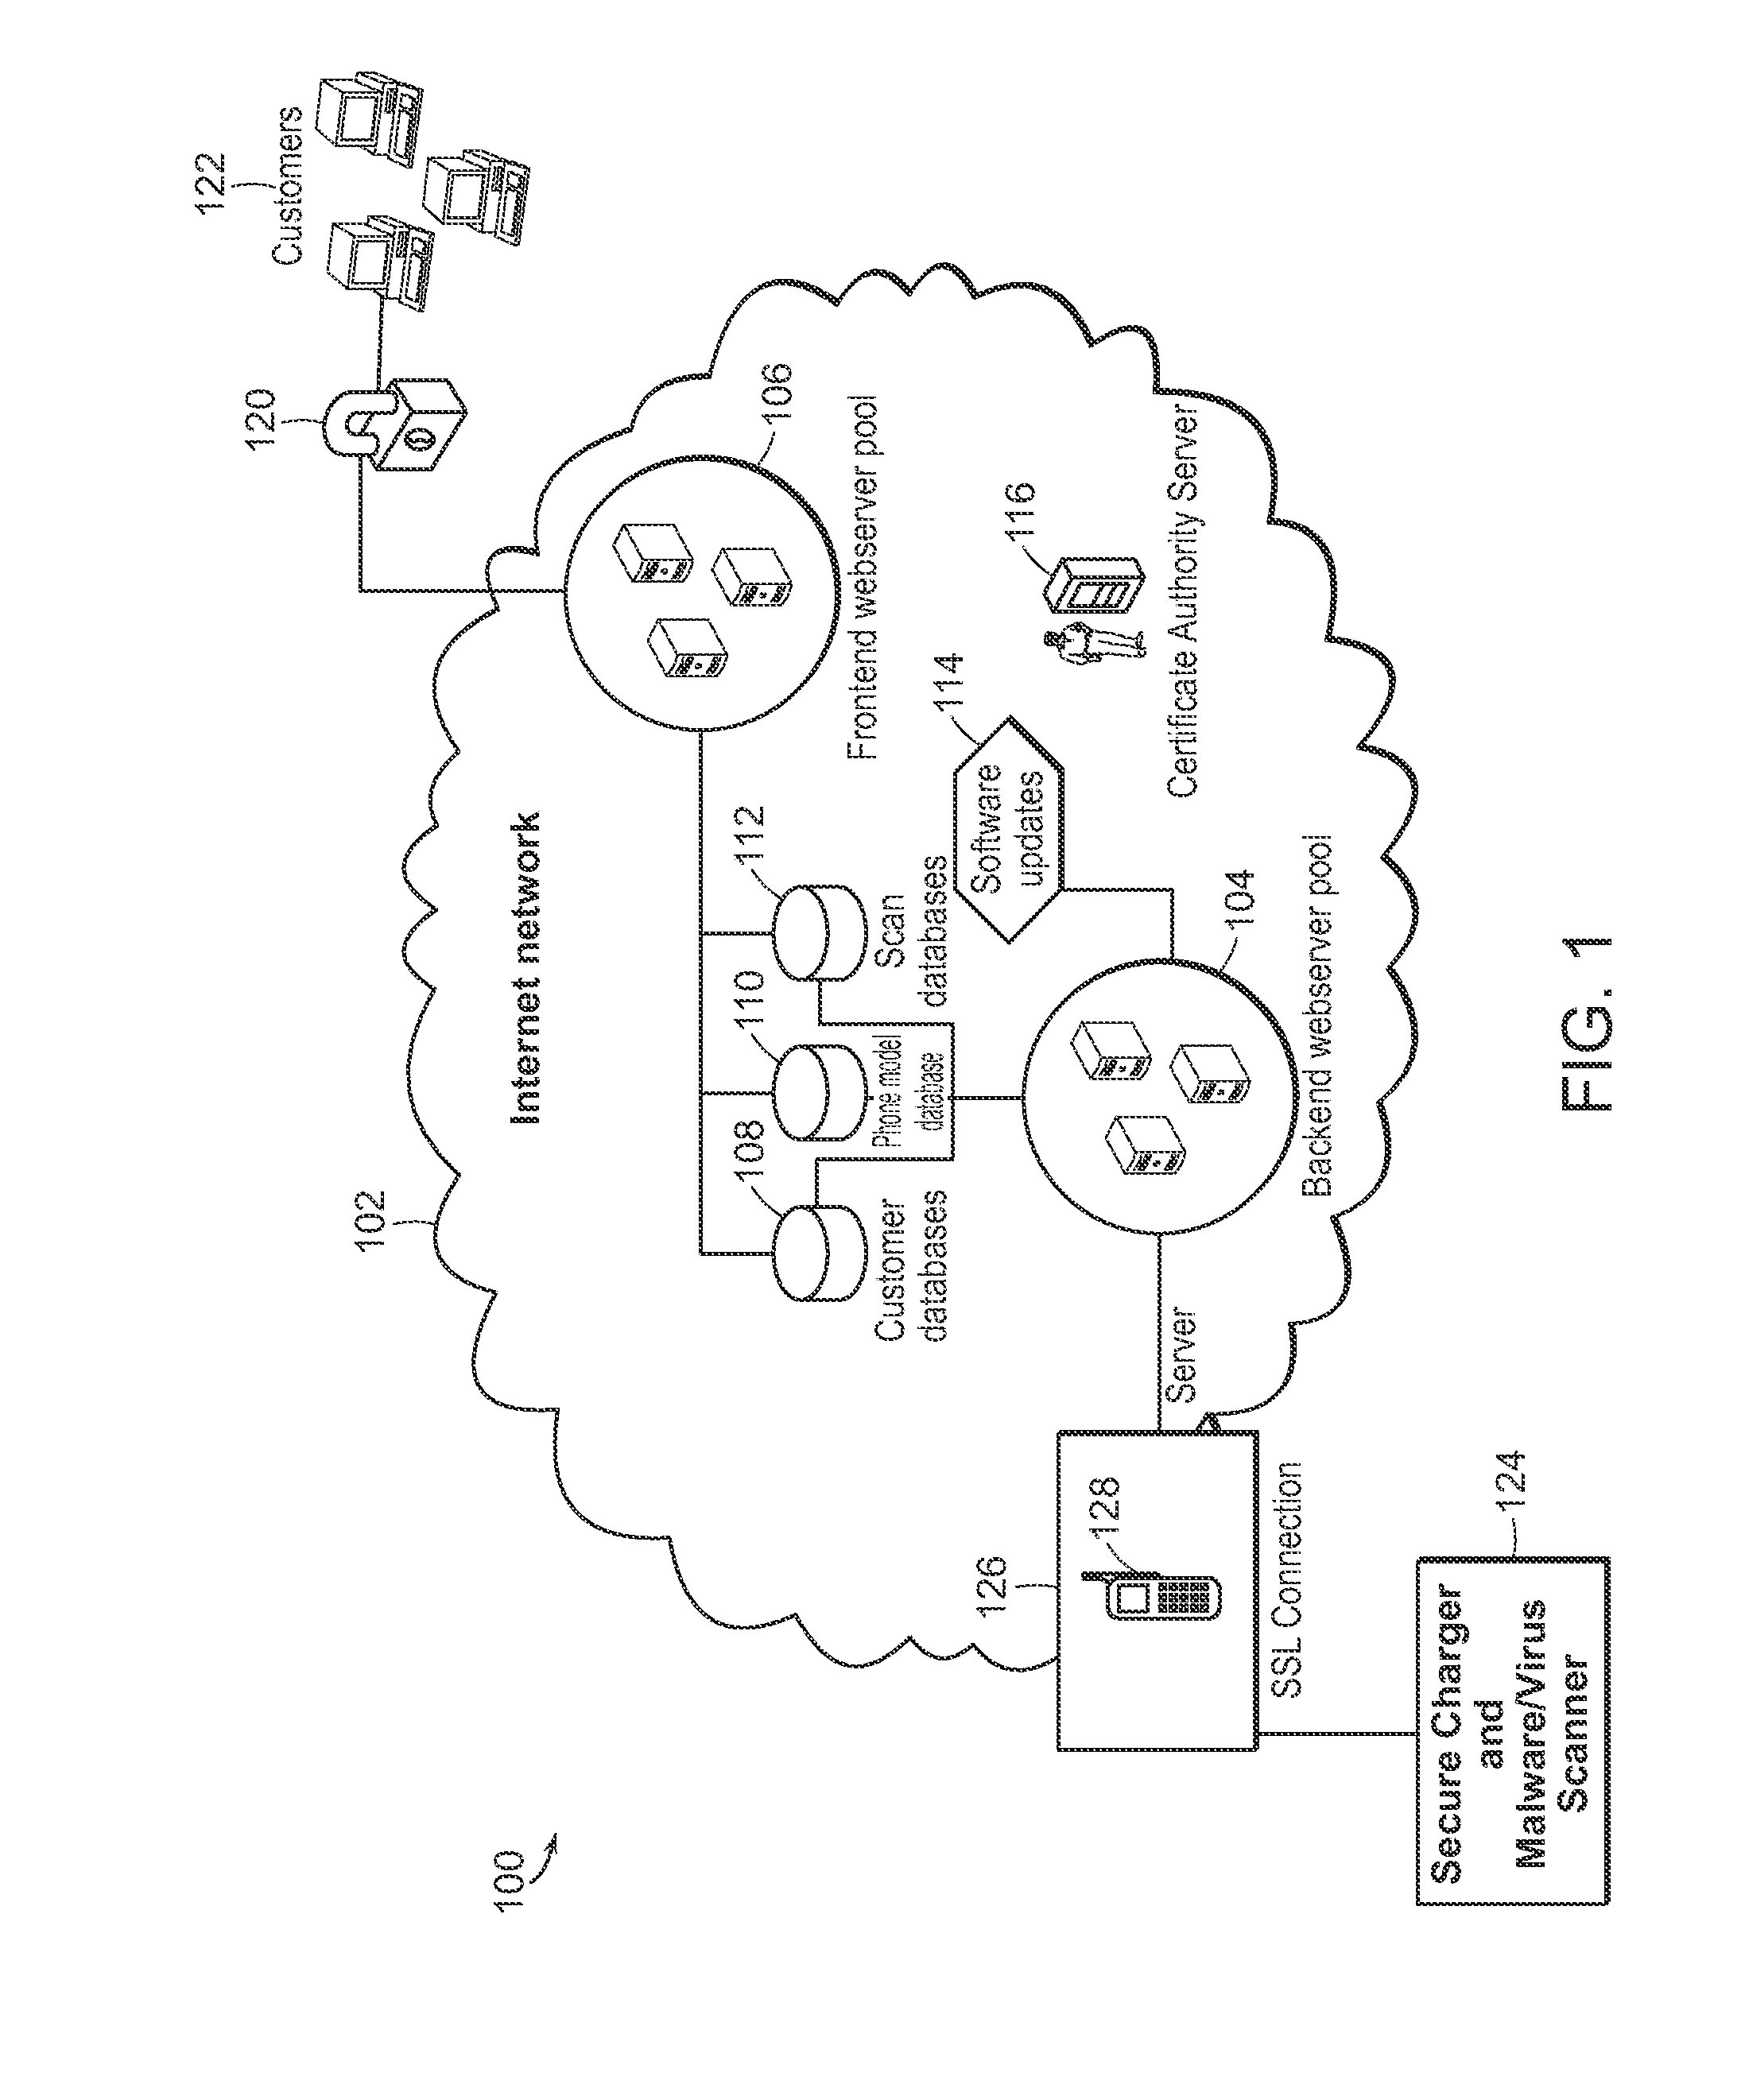 System and Method for Bidirectional Trust Between Downloaded Applications and Mobile Devices Including a Secure Charger and Malware Scanner